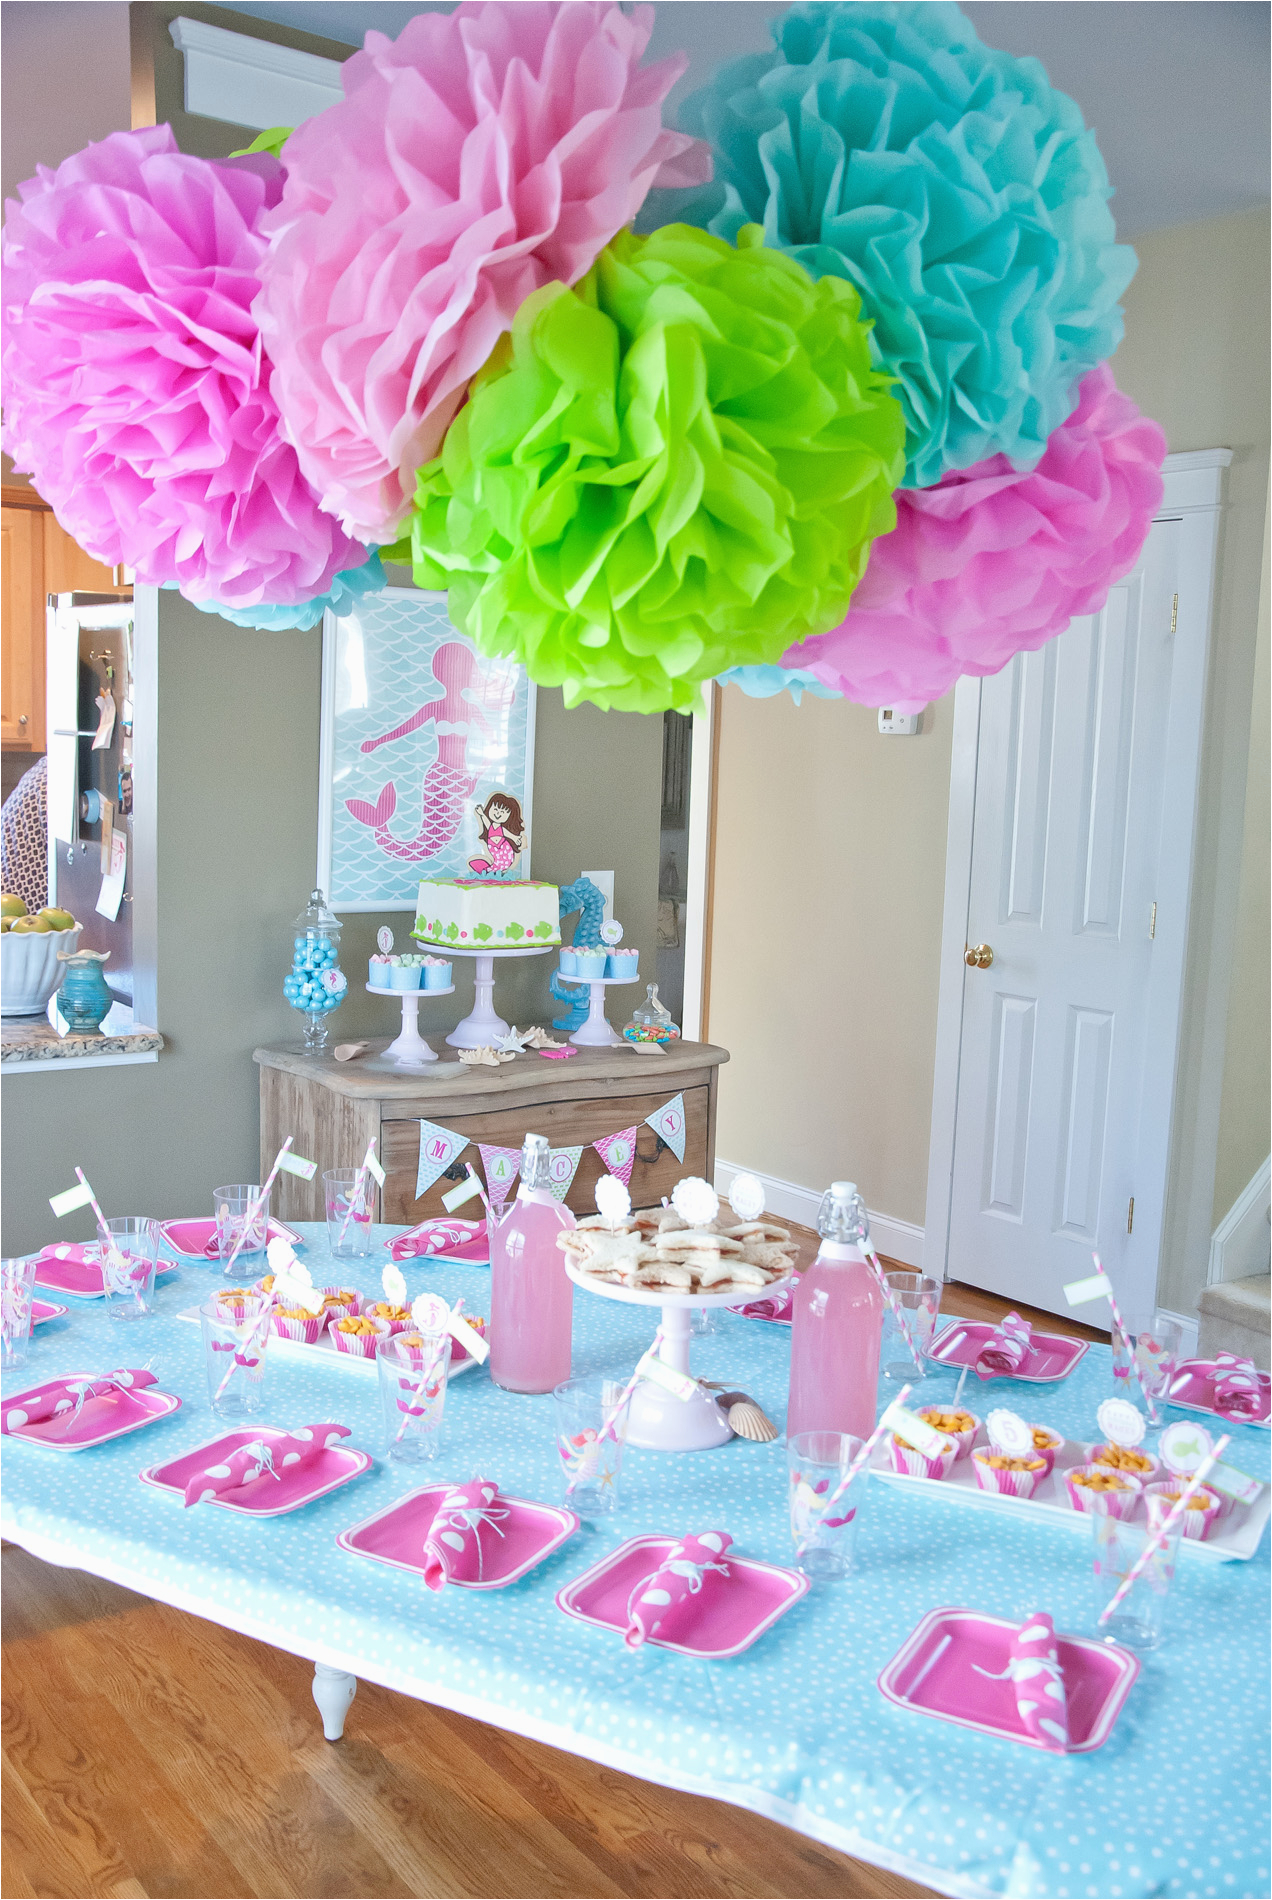 Table Decorations Ideas for Birthday Parties A Dreamy Mermaid Birthday Party anders Ruff Custom